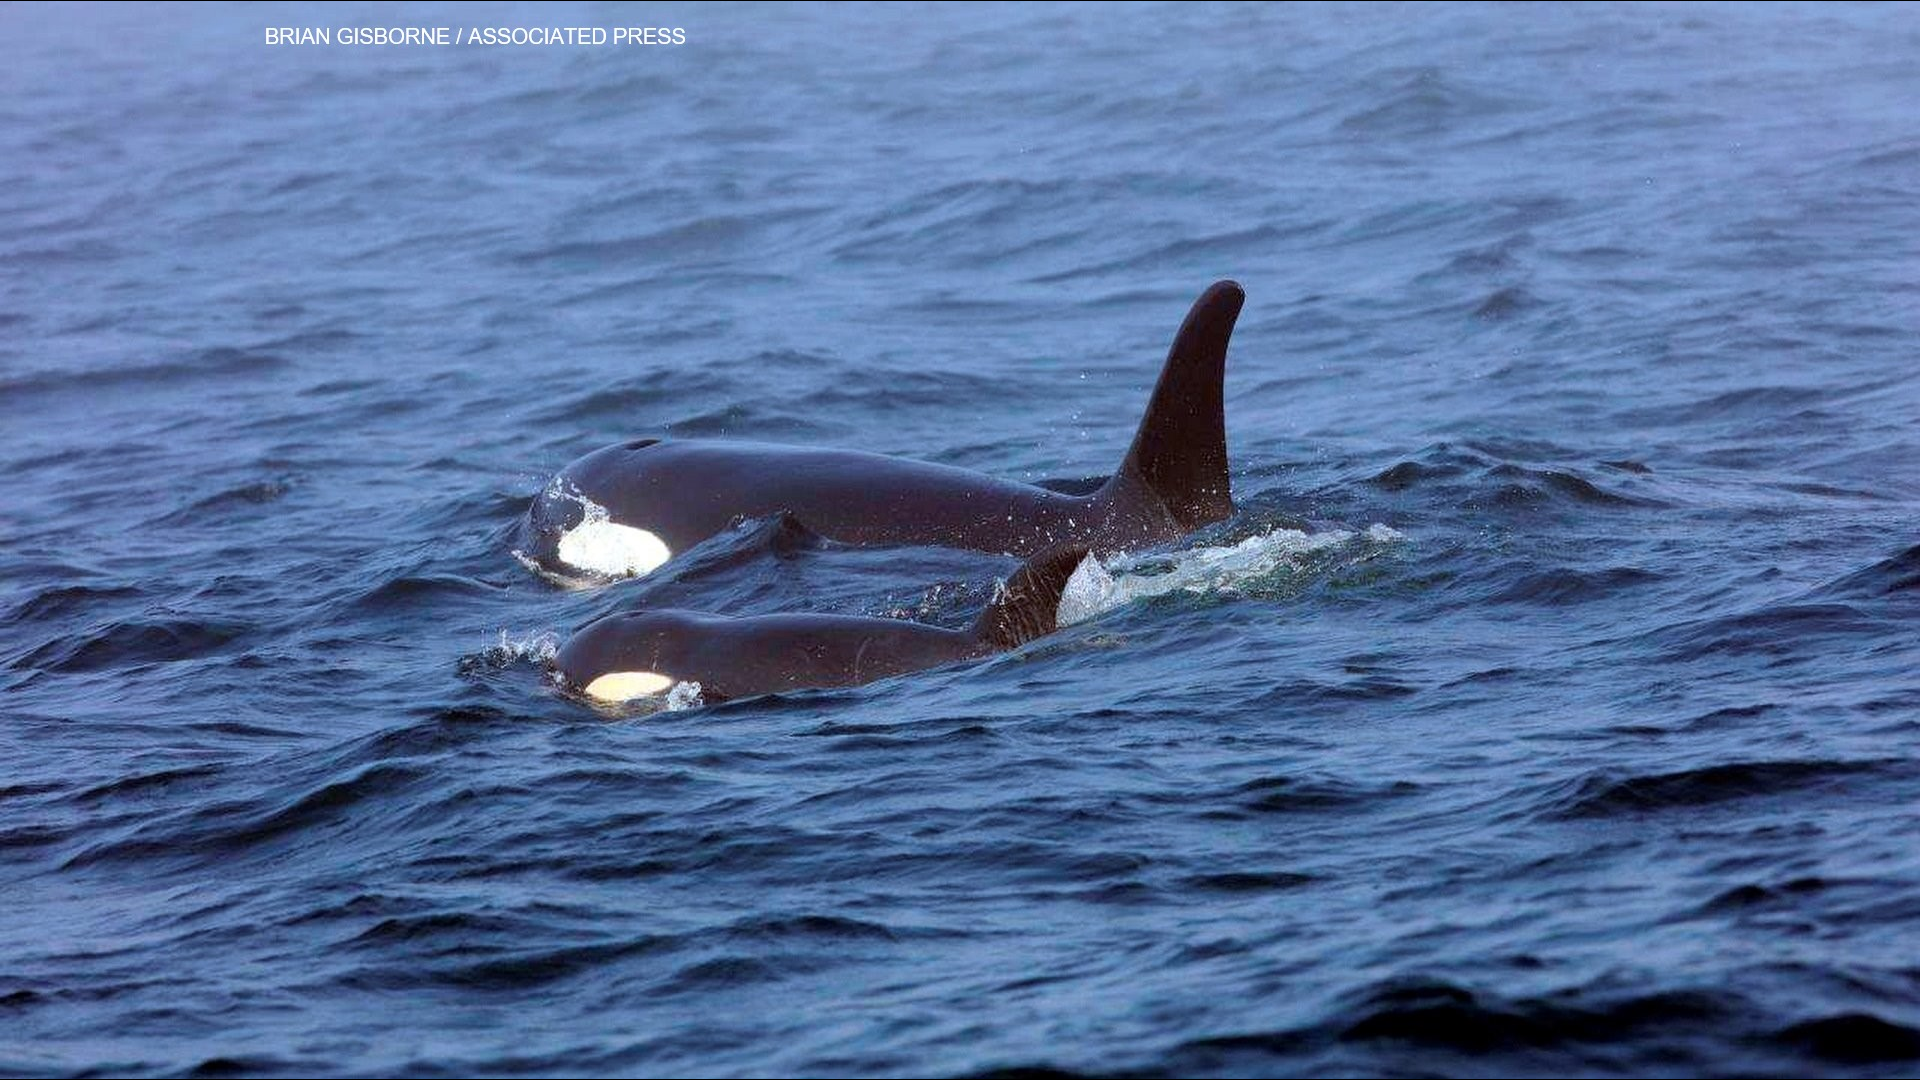 Three more Southern Resident killer whales were declared dead by the Center for Whale Research which brings their total population down to 73.